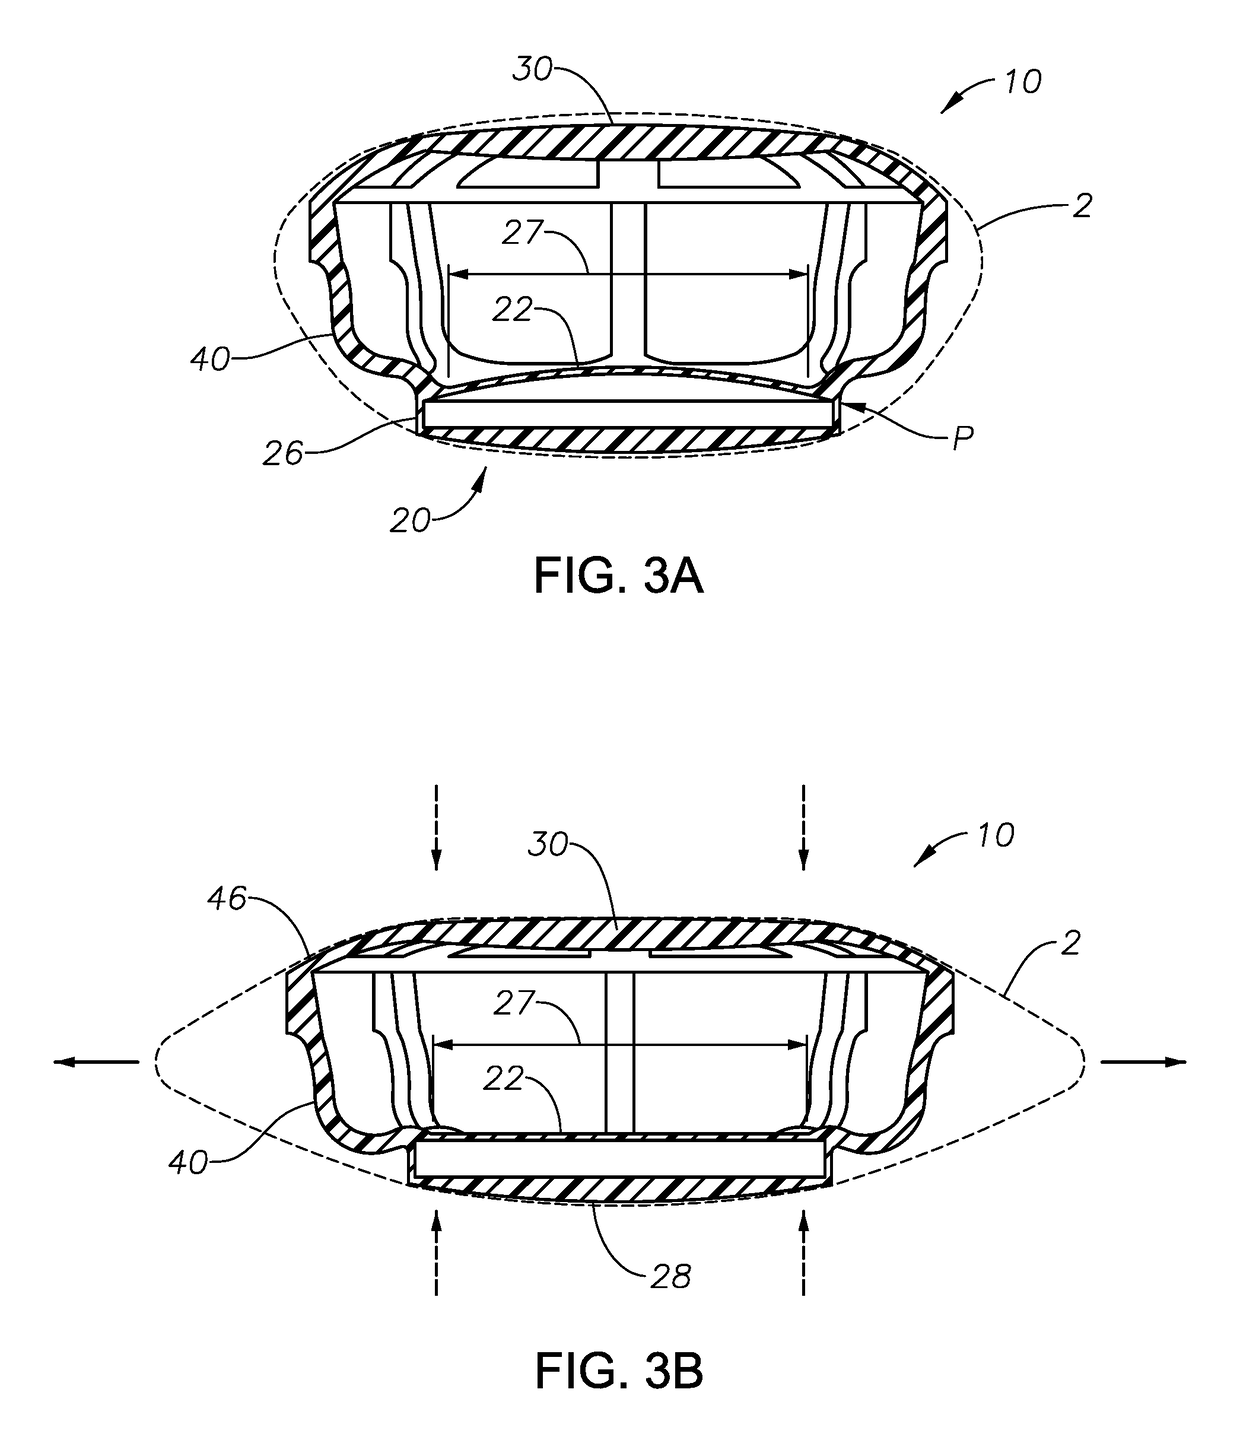 Dual optic, curvature changing accommodative IOL having a fixed disaccommodated refractive state